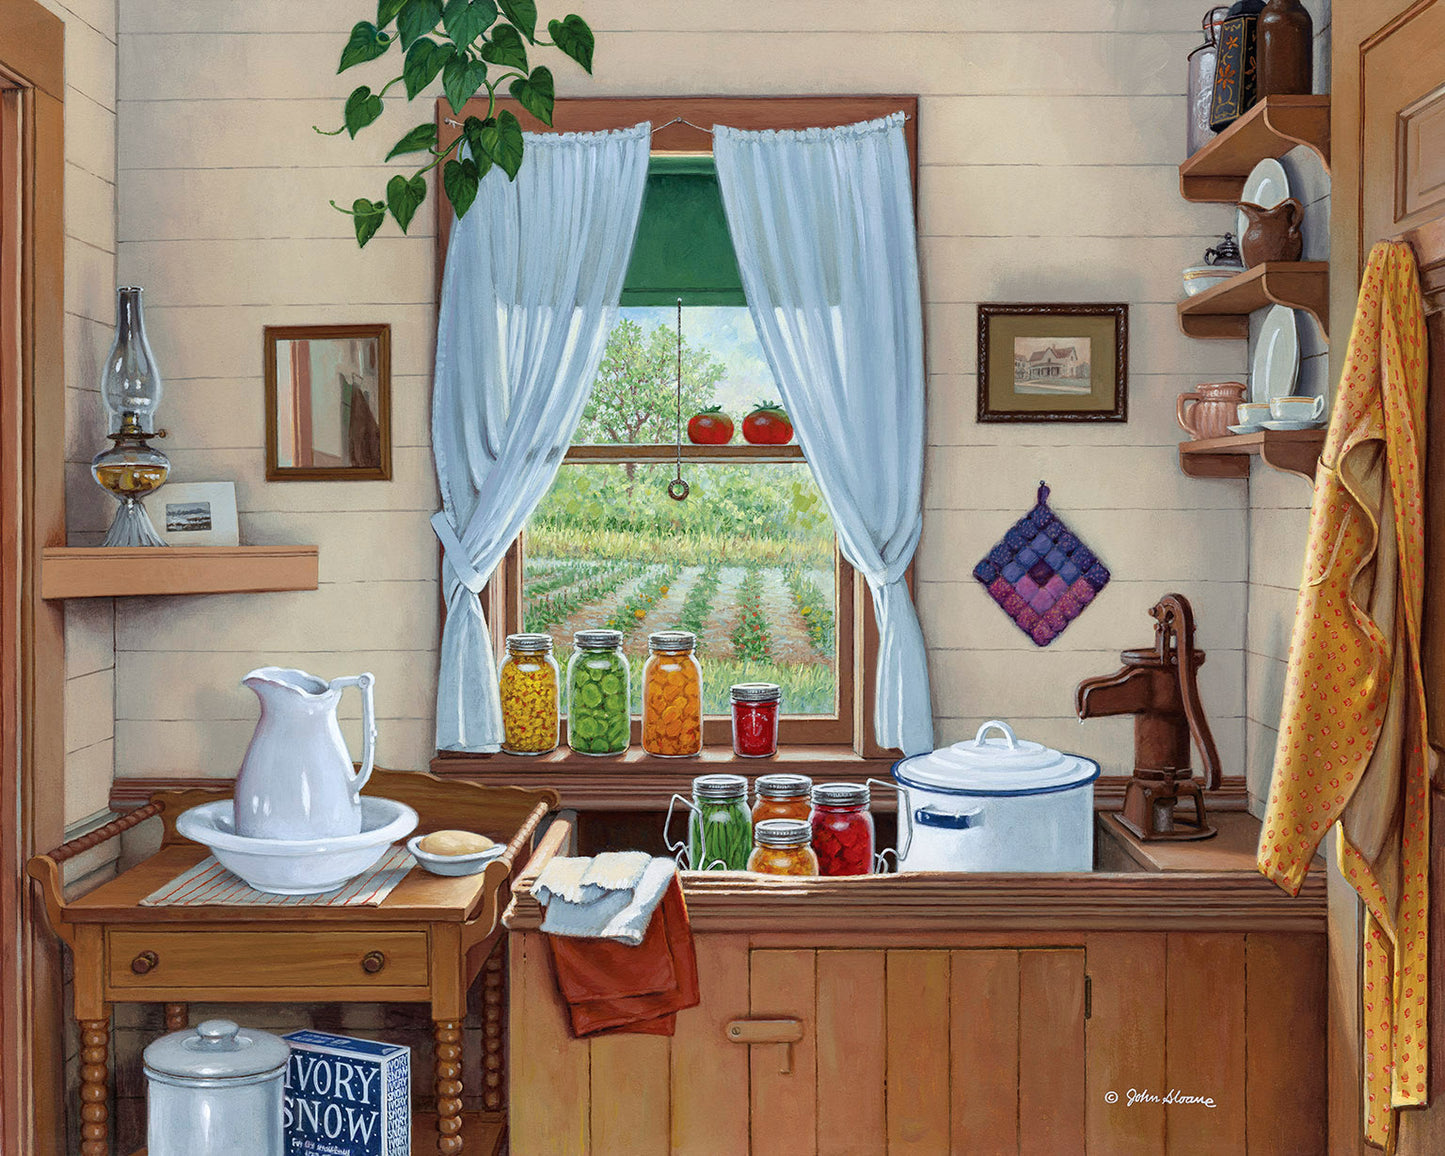 A Taste of Summer - Puzzle by John Sloane